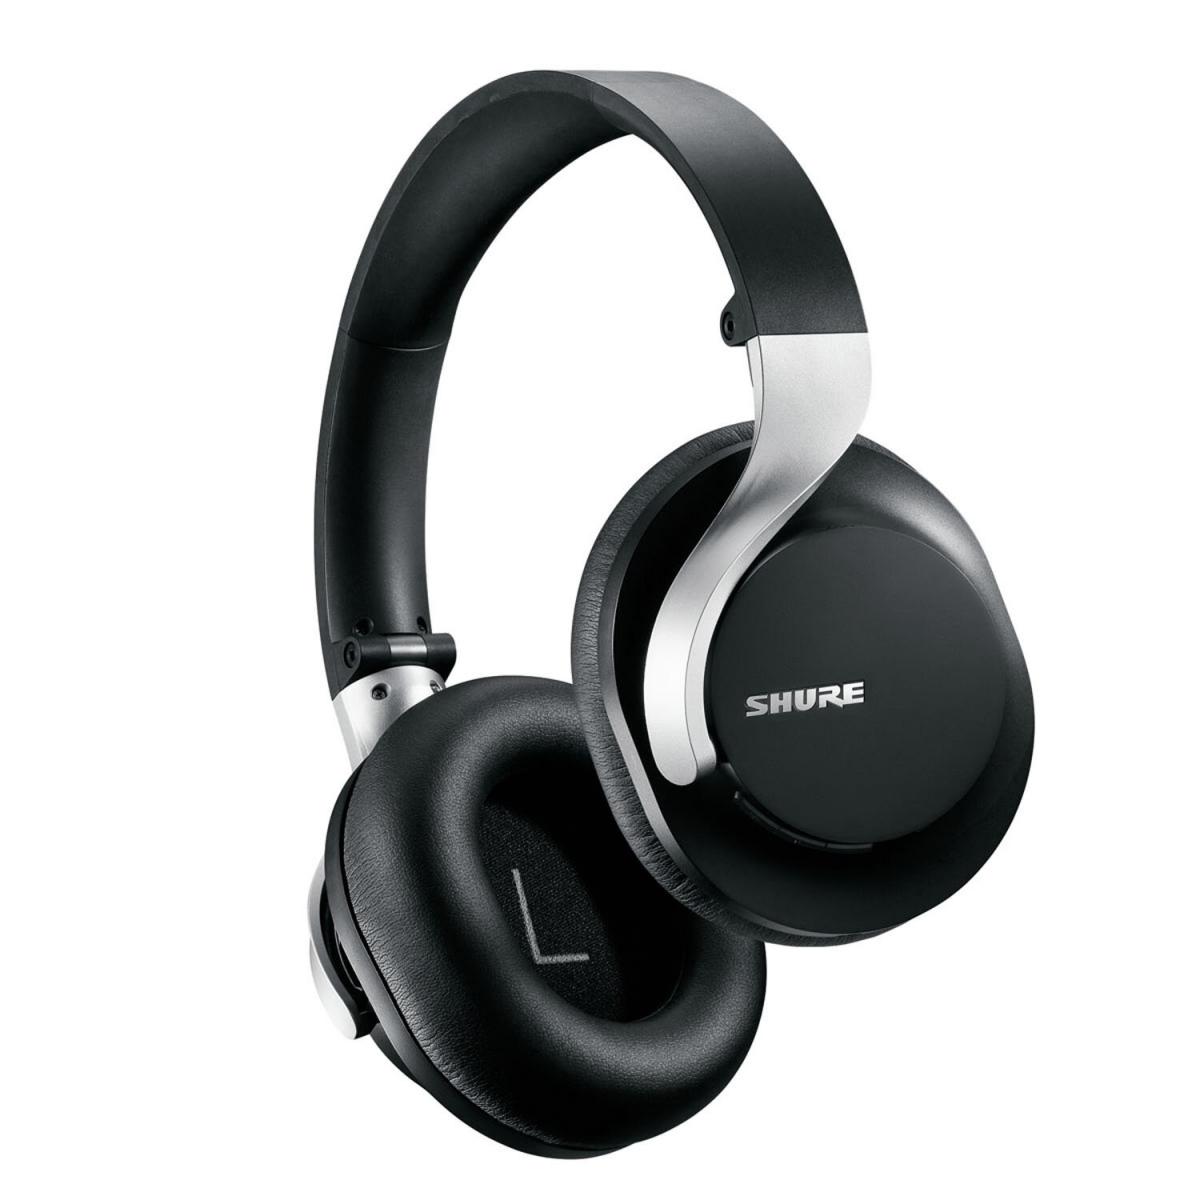 SHURE AONIC 40 Wireless Noise Cancelling Headphones